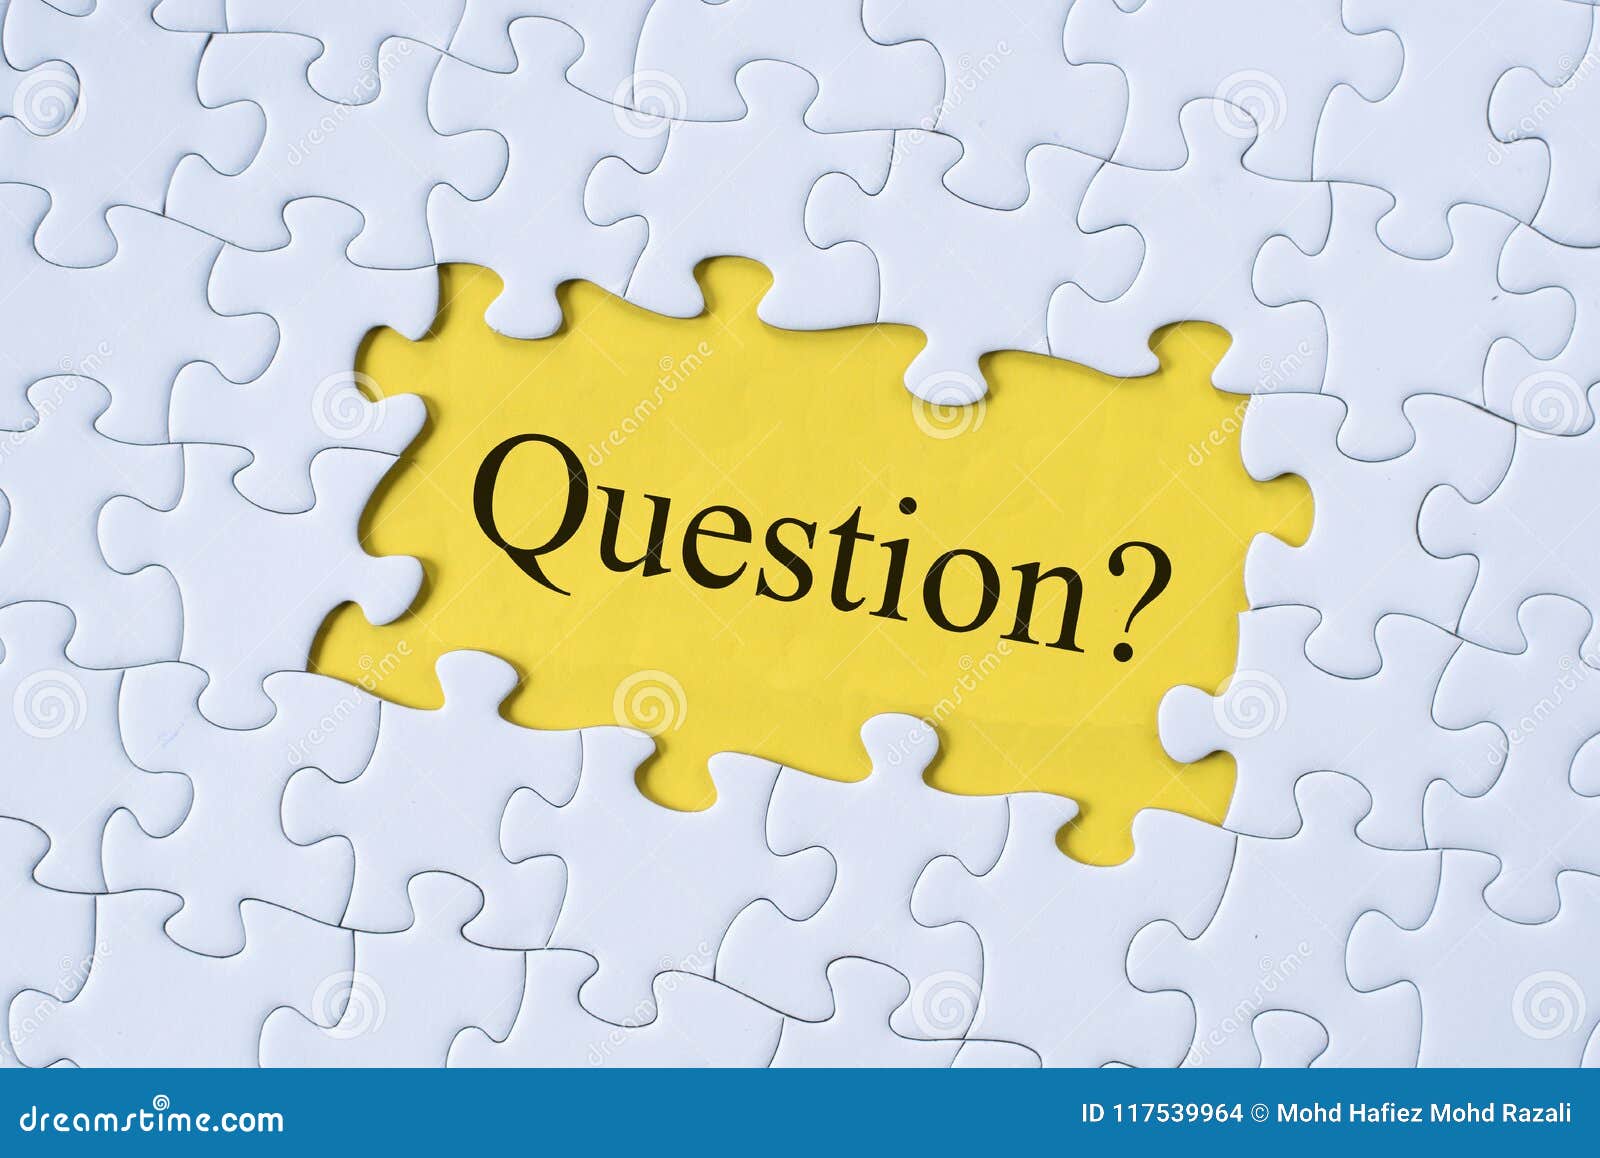 Question Word on Jigsaw Puzzle with Yellow Background Stock Photo ...